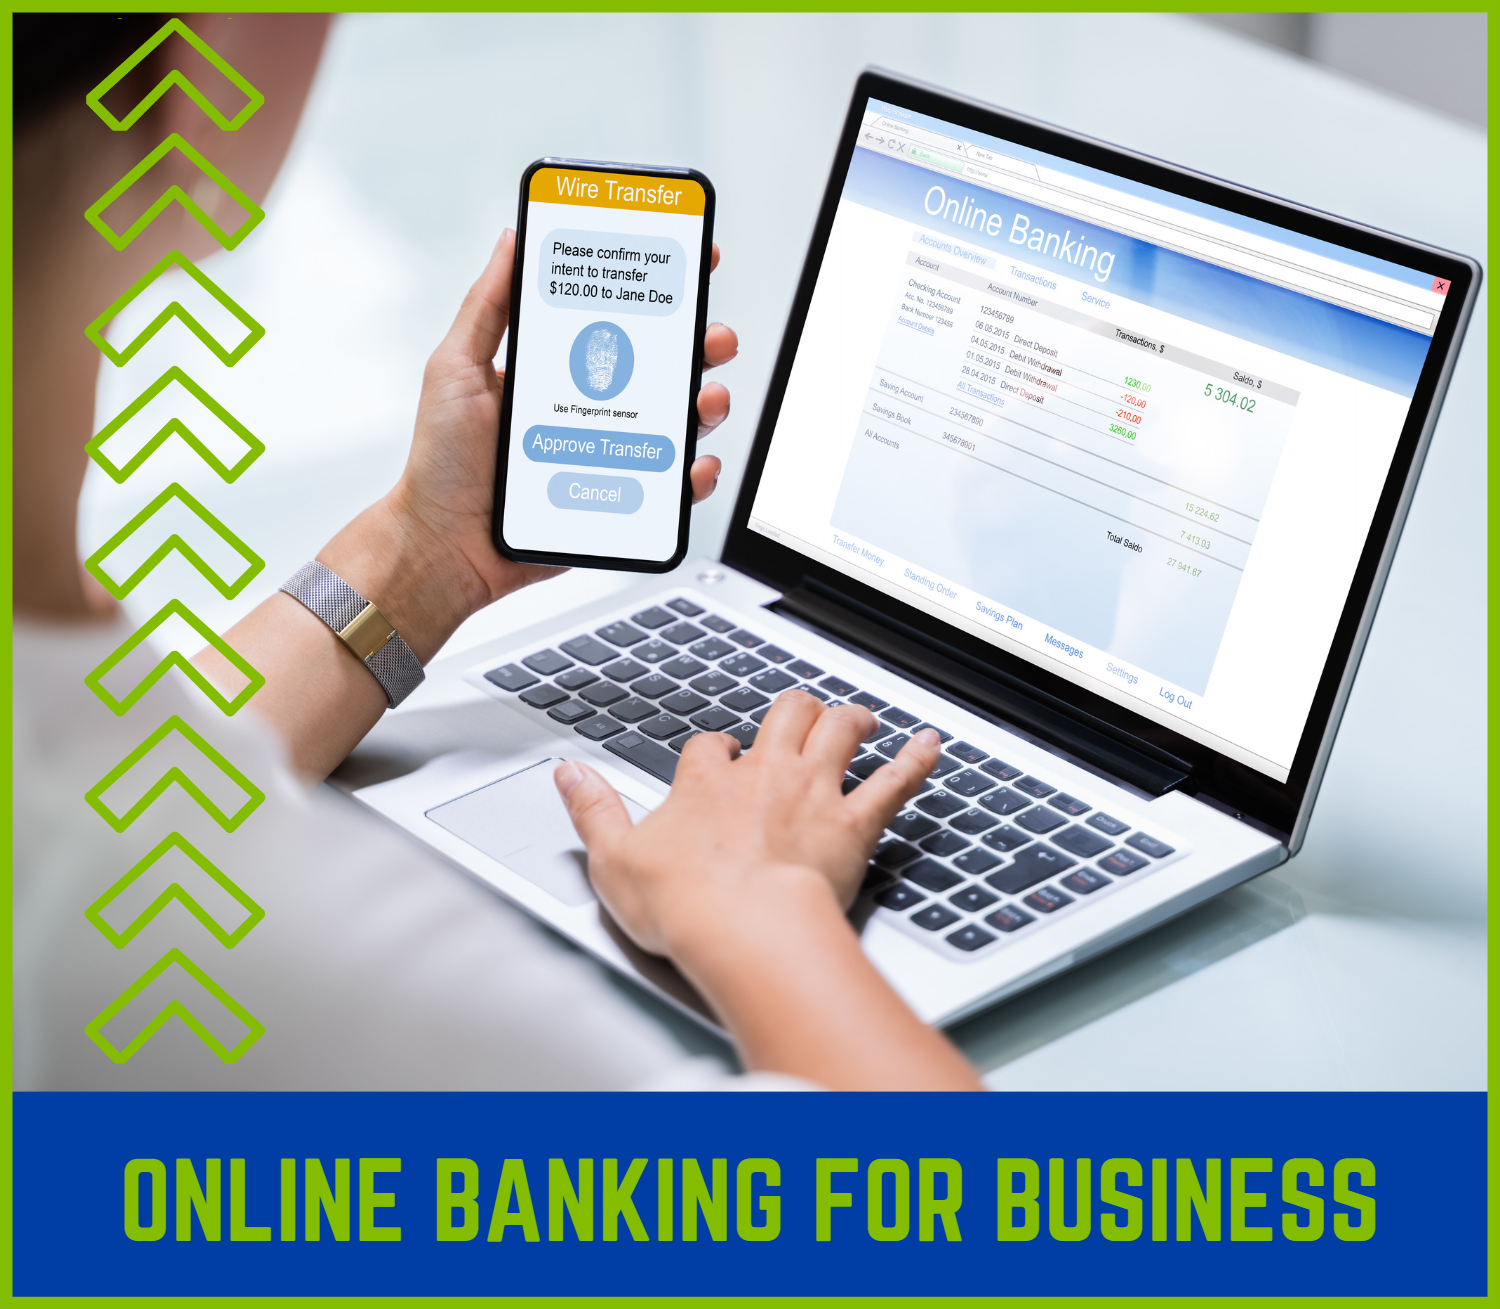 Online Banking for Business - link